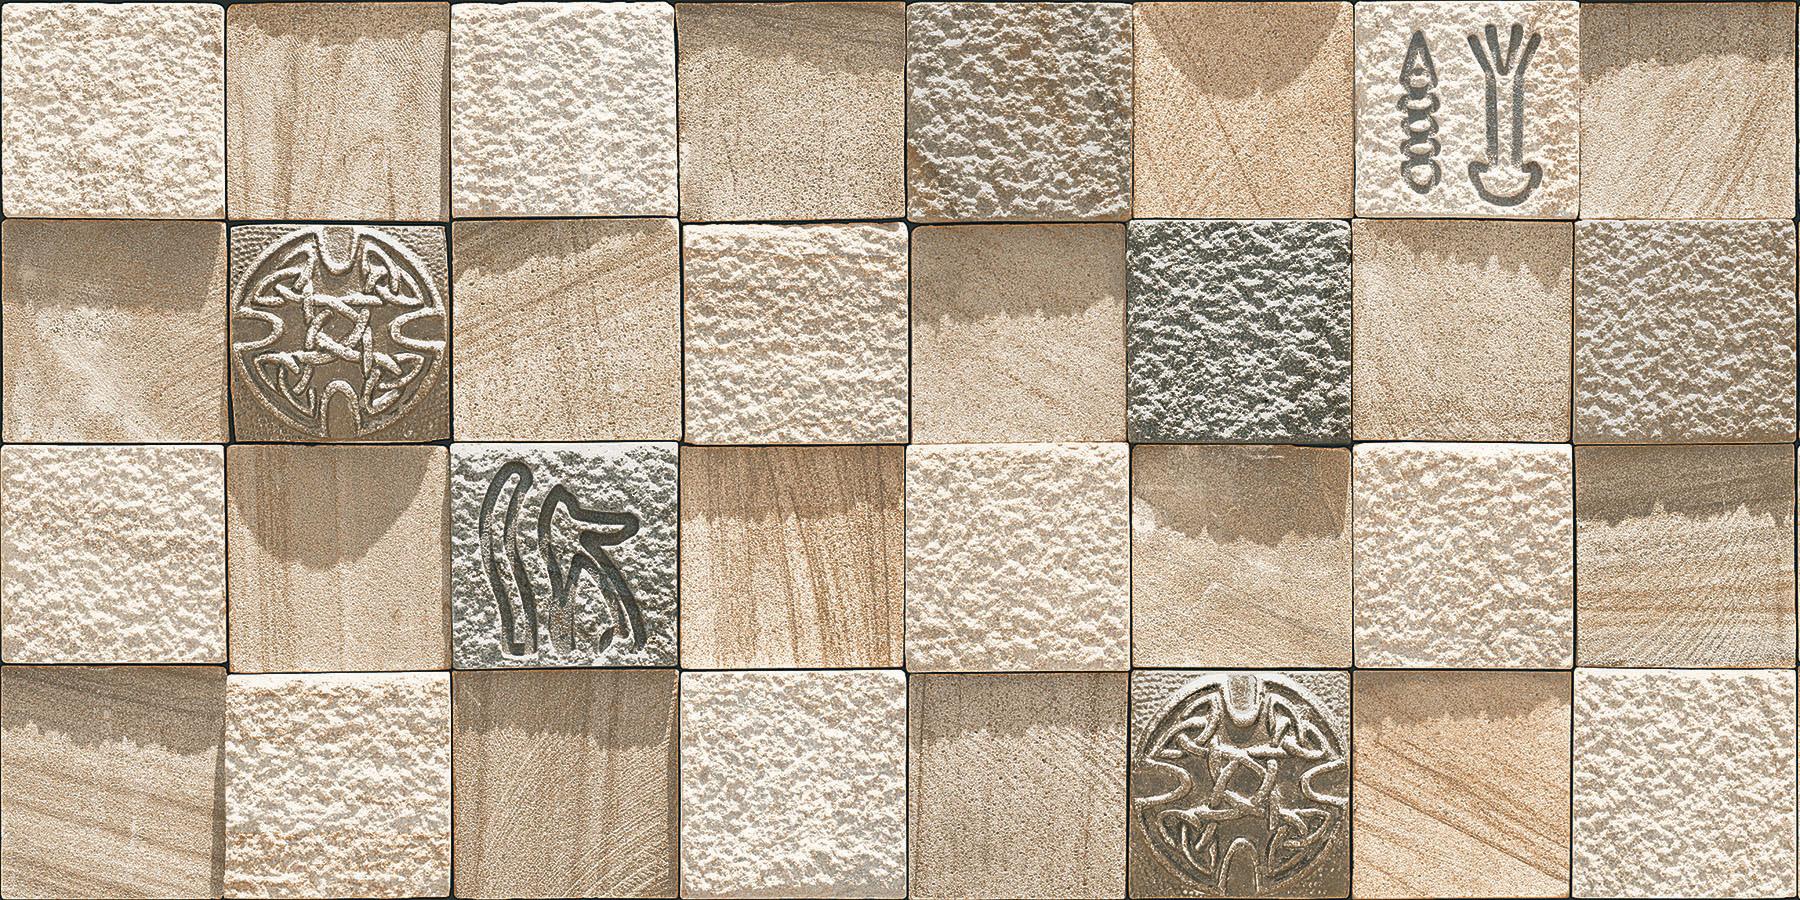 Wall Tiles for Bathroom Tiles, Living Room Tiles, Elevation Tiles, Accent Tiles, Hospital Tiles, Bar/Restaurant, Commercial/Office, Outdoor Area, School & Collages